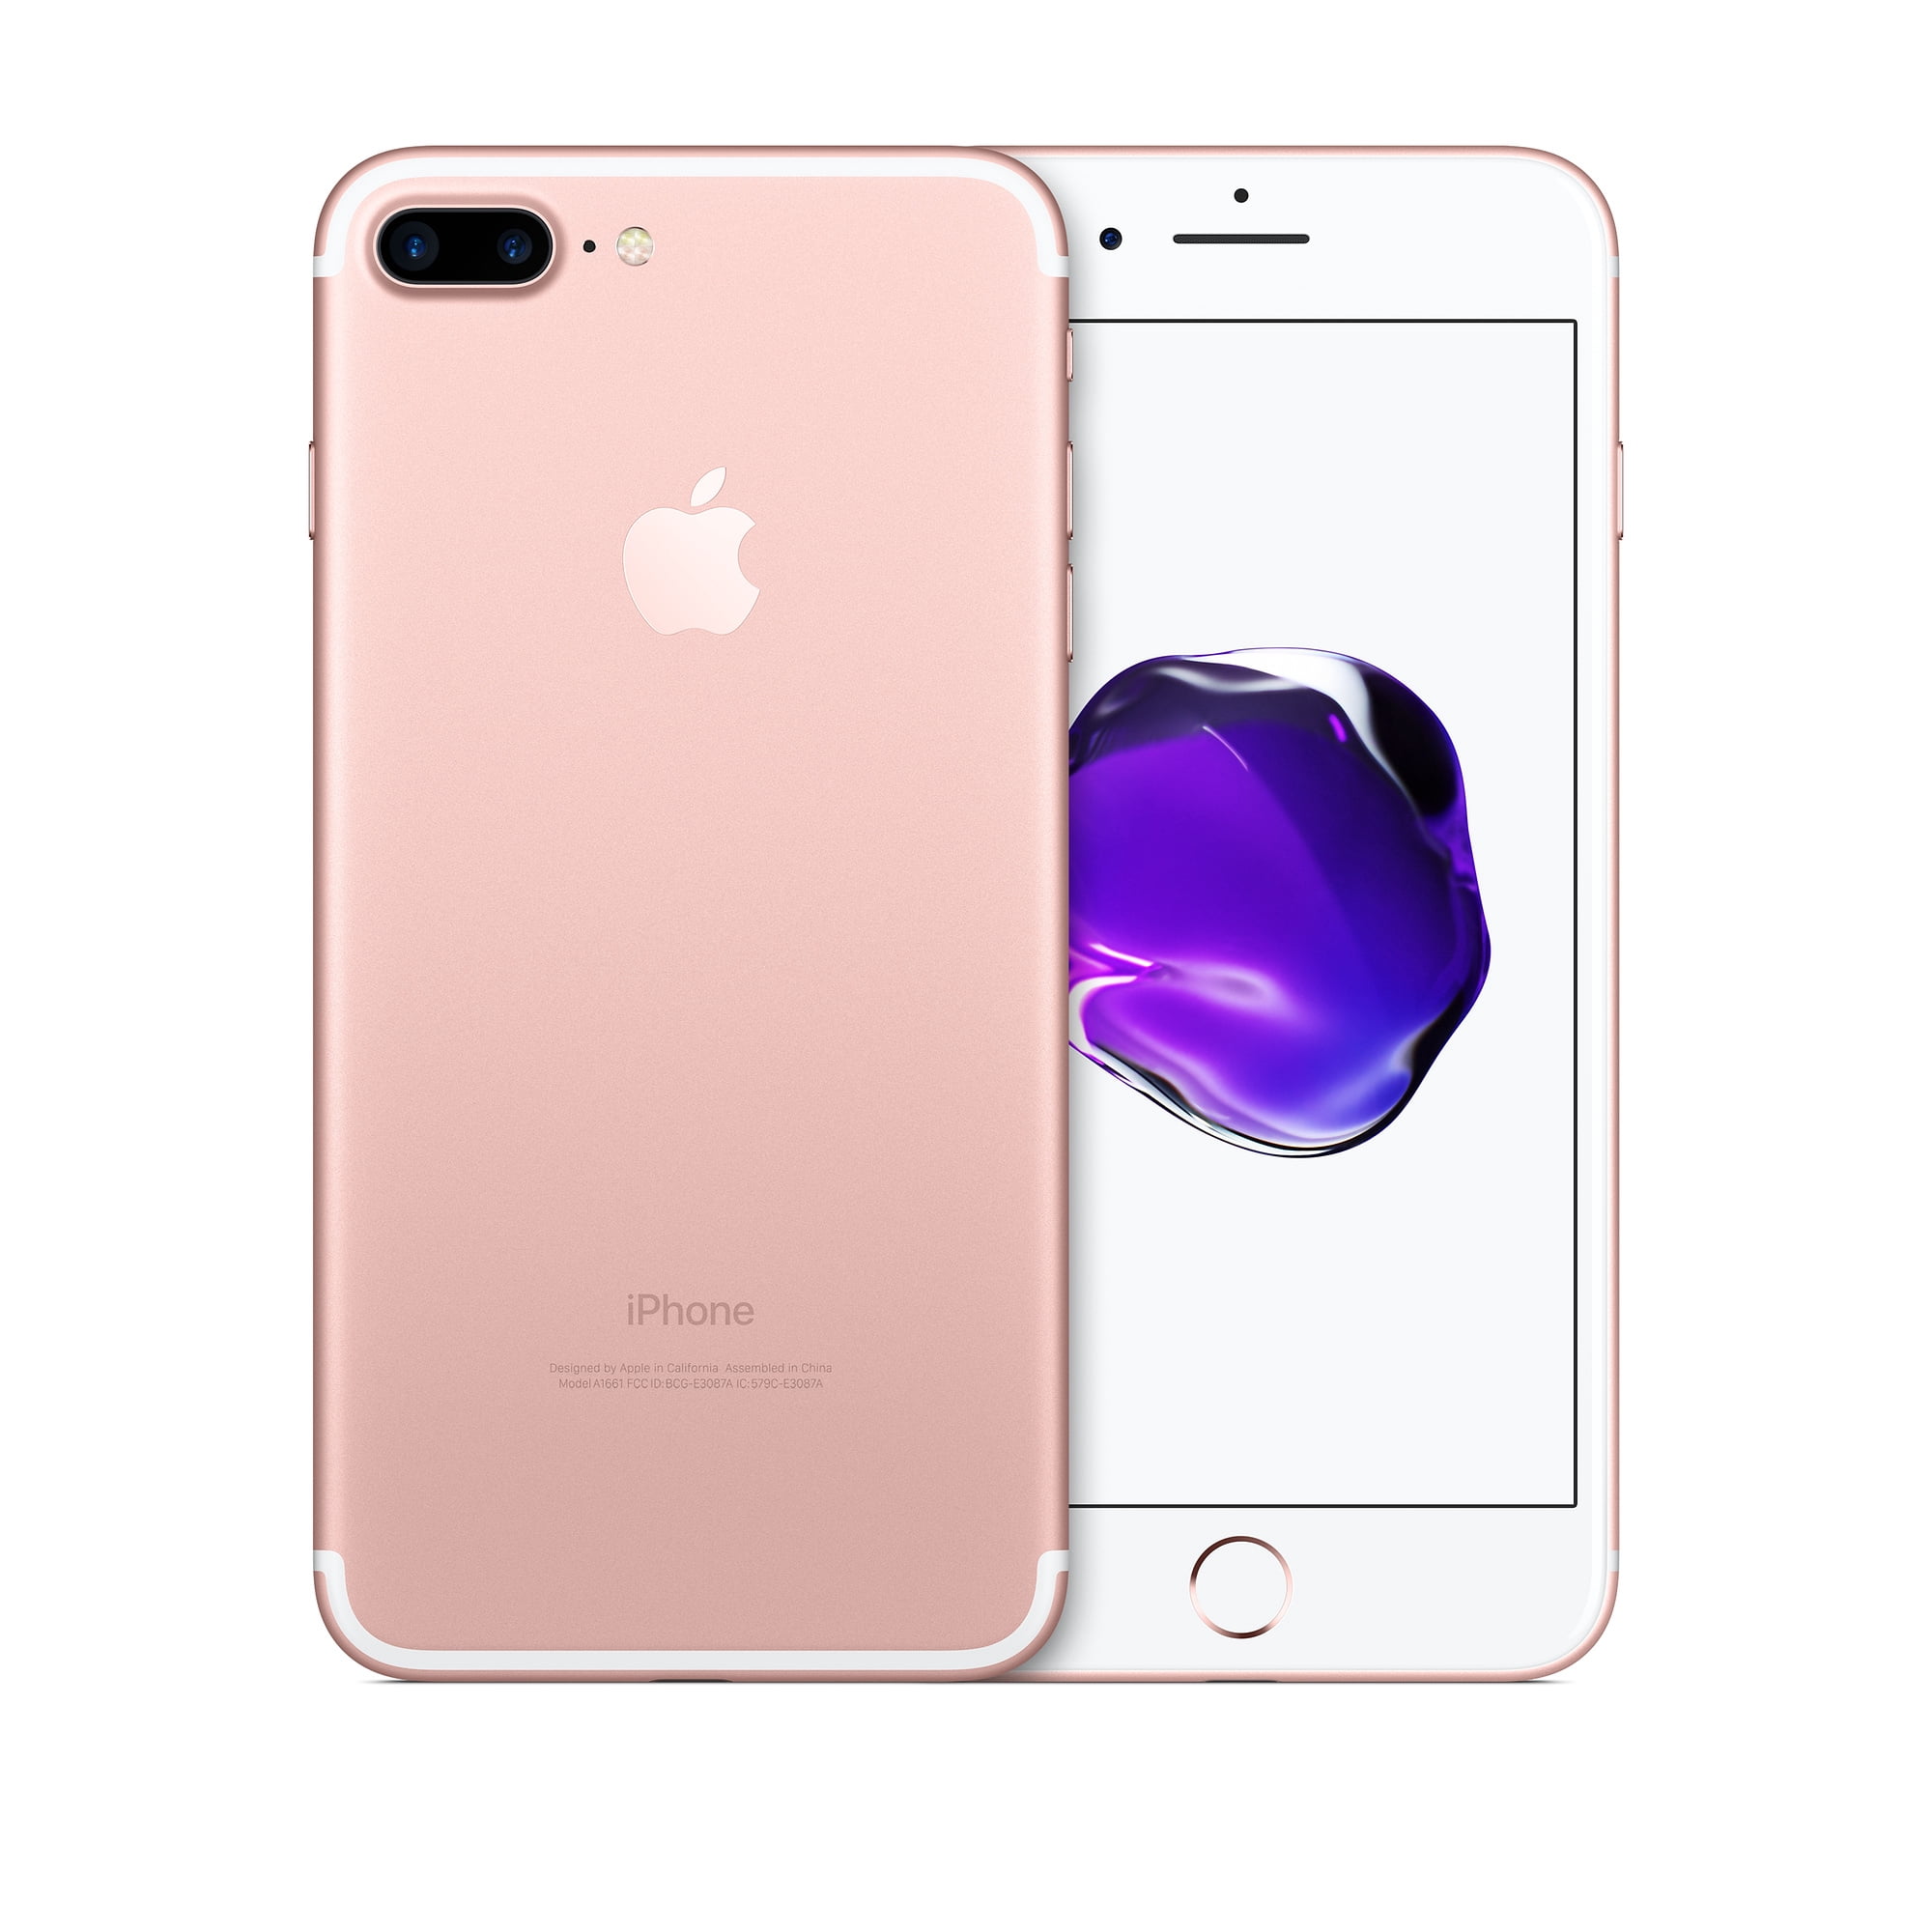 Restored Apple iPhone 7 Plus 32GB Rose Gold GSM Unlocked (AT&T / T-Mobile) Smartphone (Refurbished)